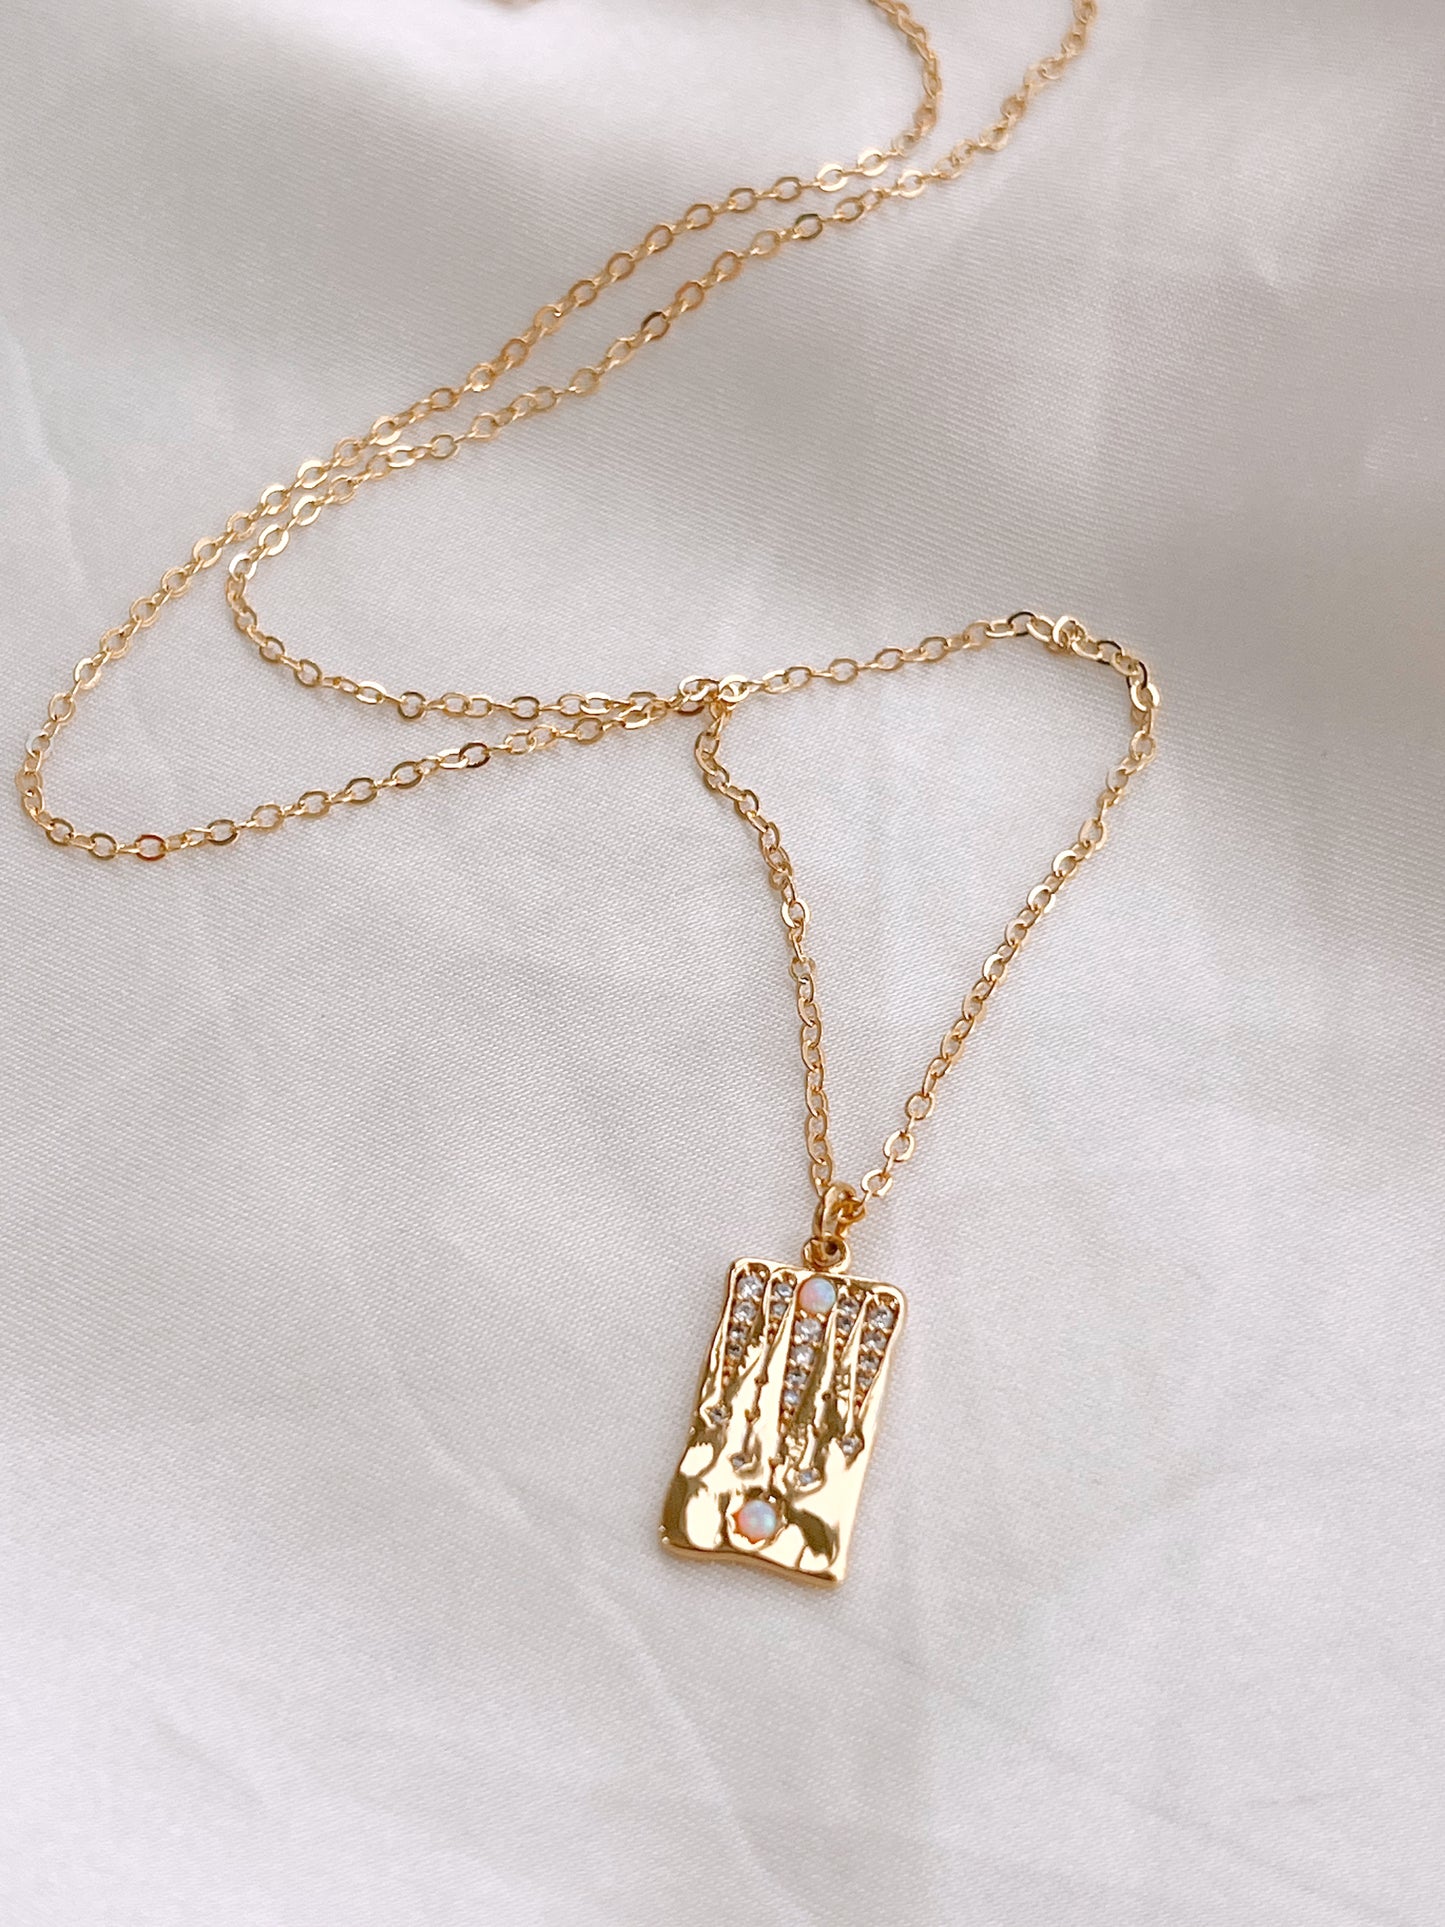 Shooting Stars Gold-Filled Necklace